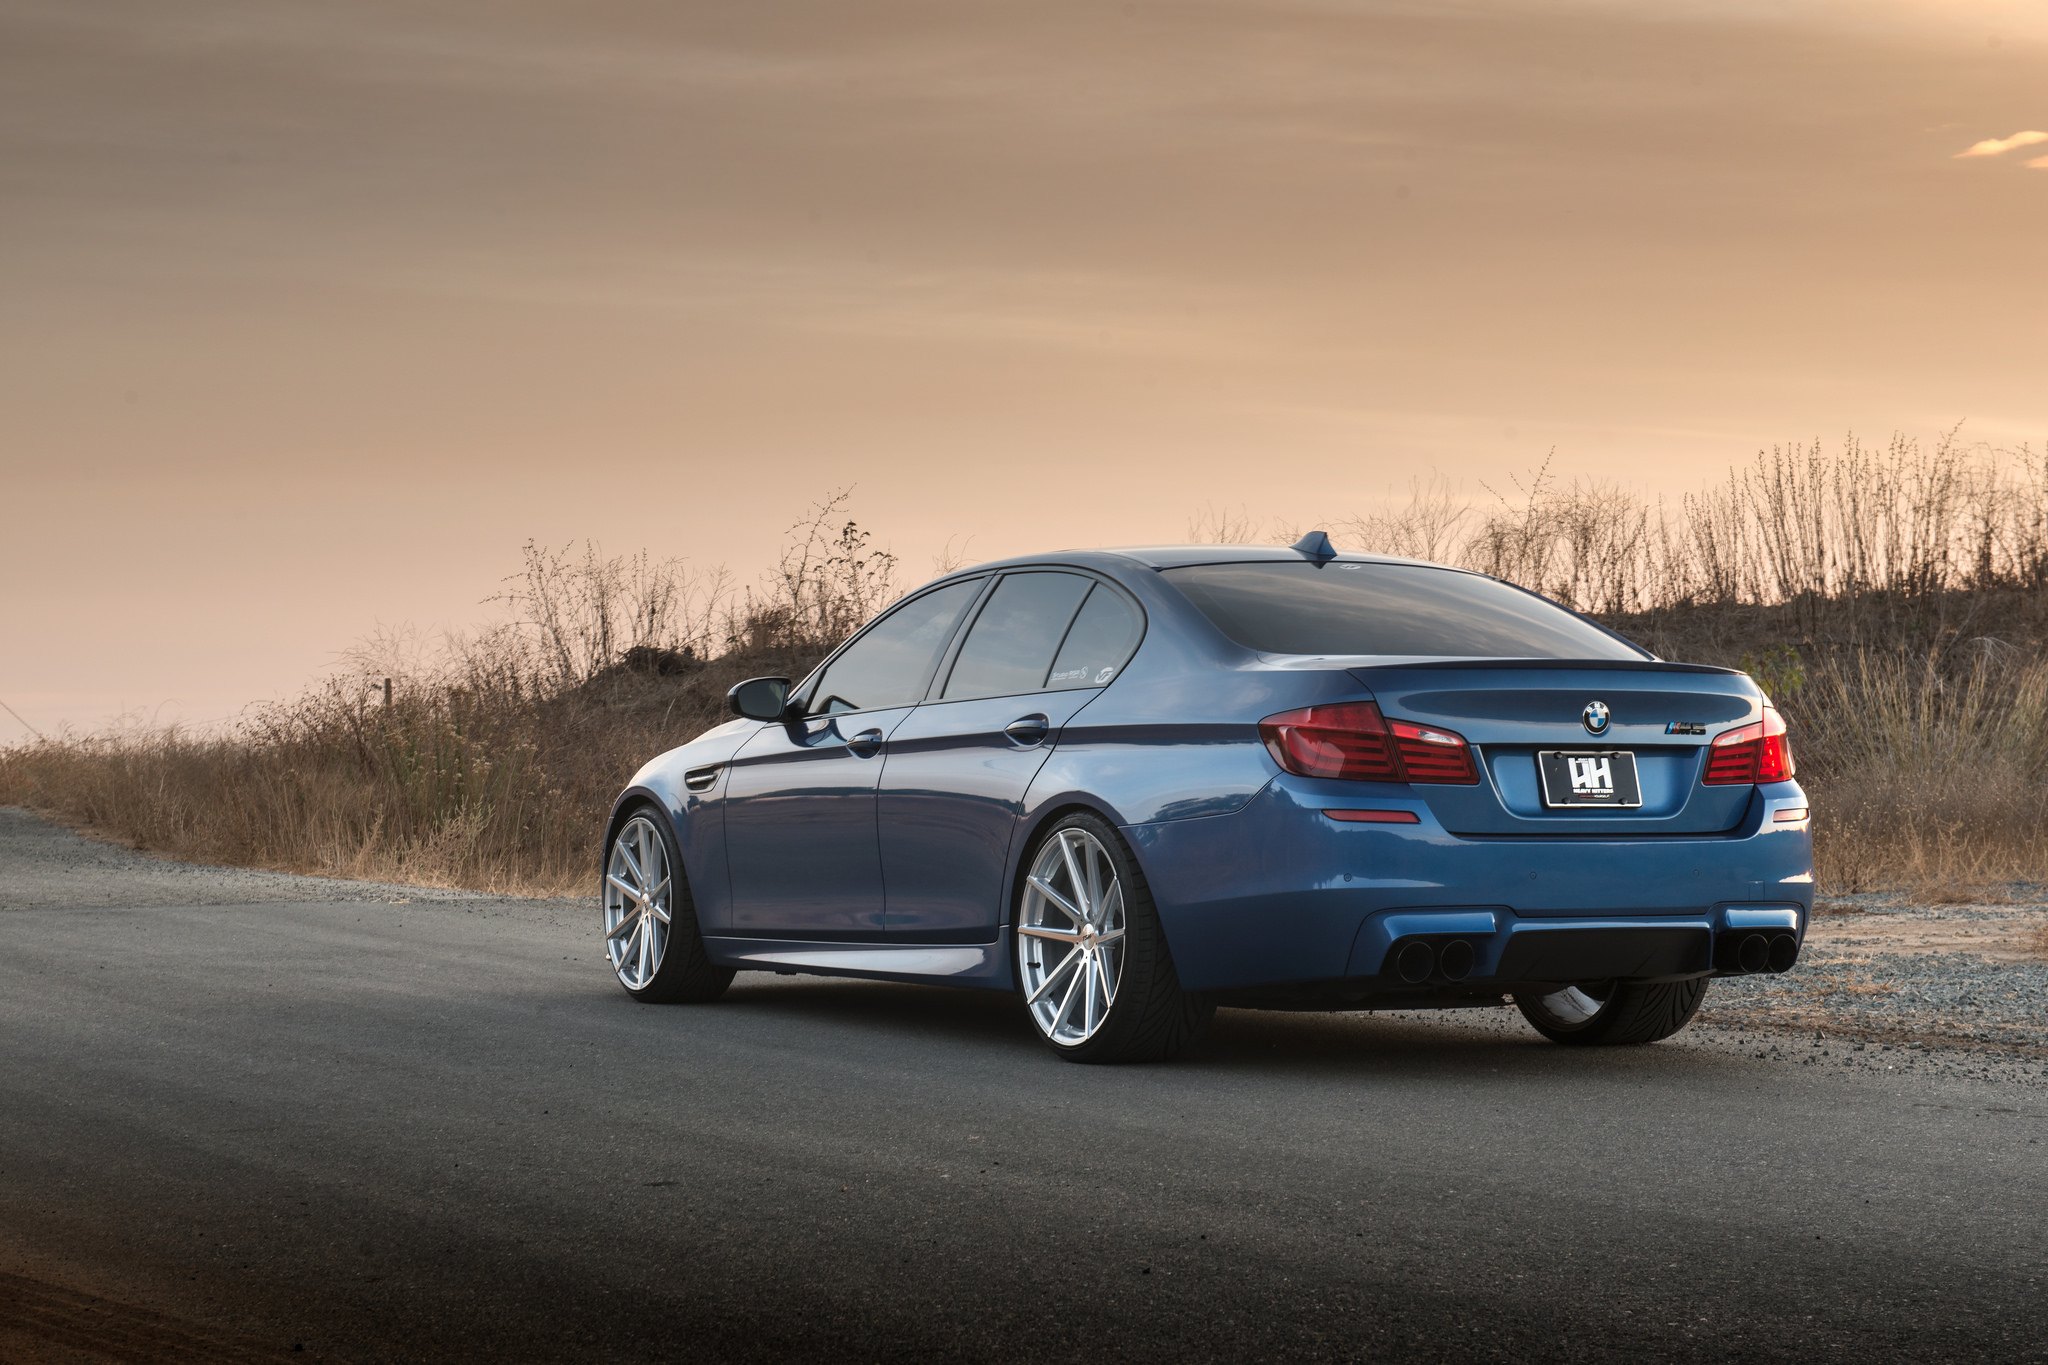 Blue BMW 5-Series with Aftermarket Rear Diffuser - Photo by TSW